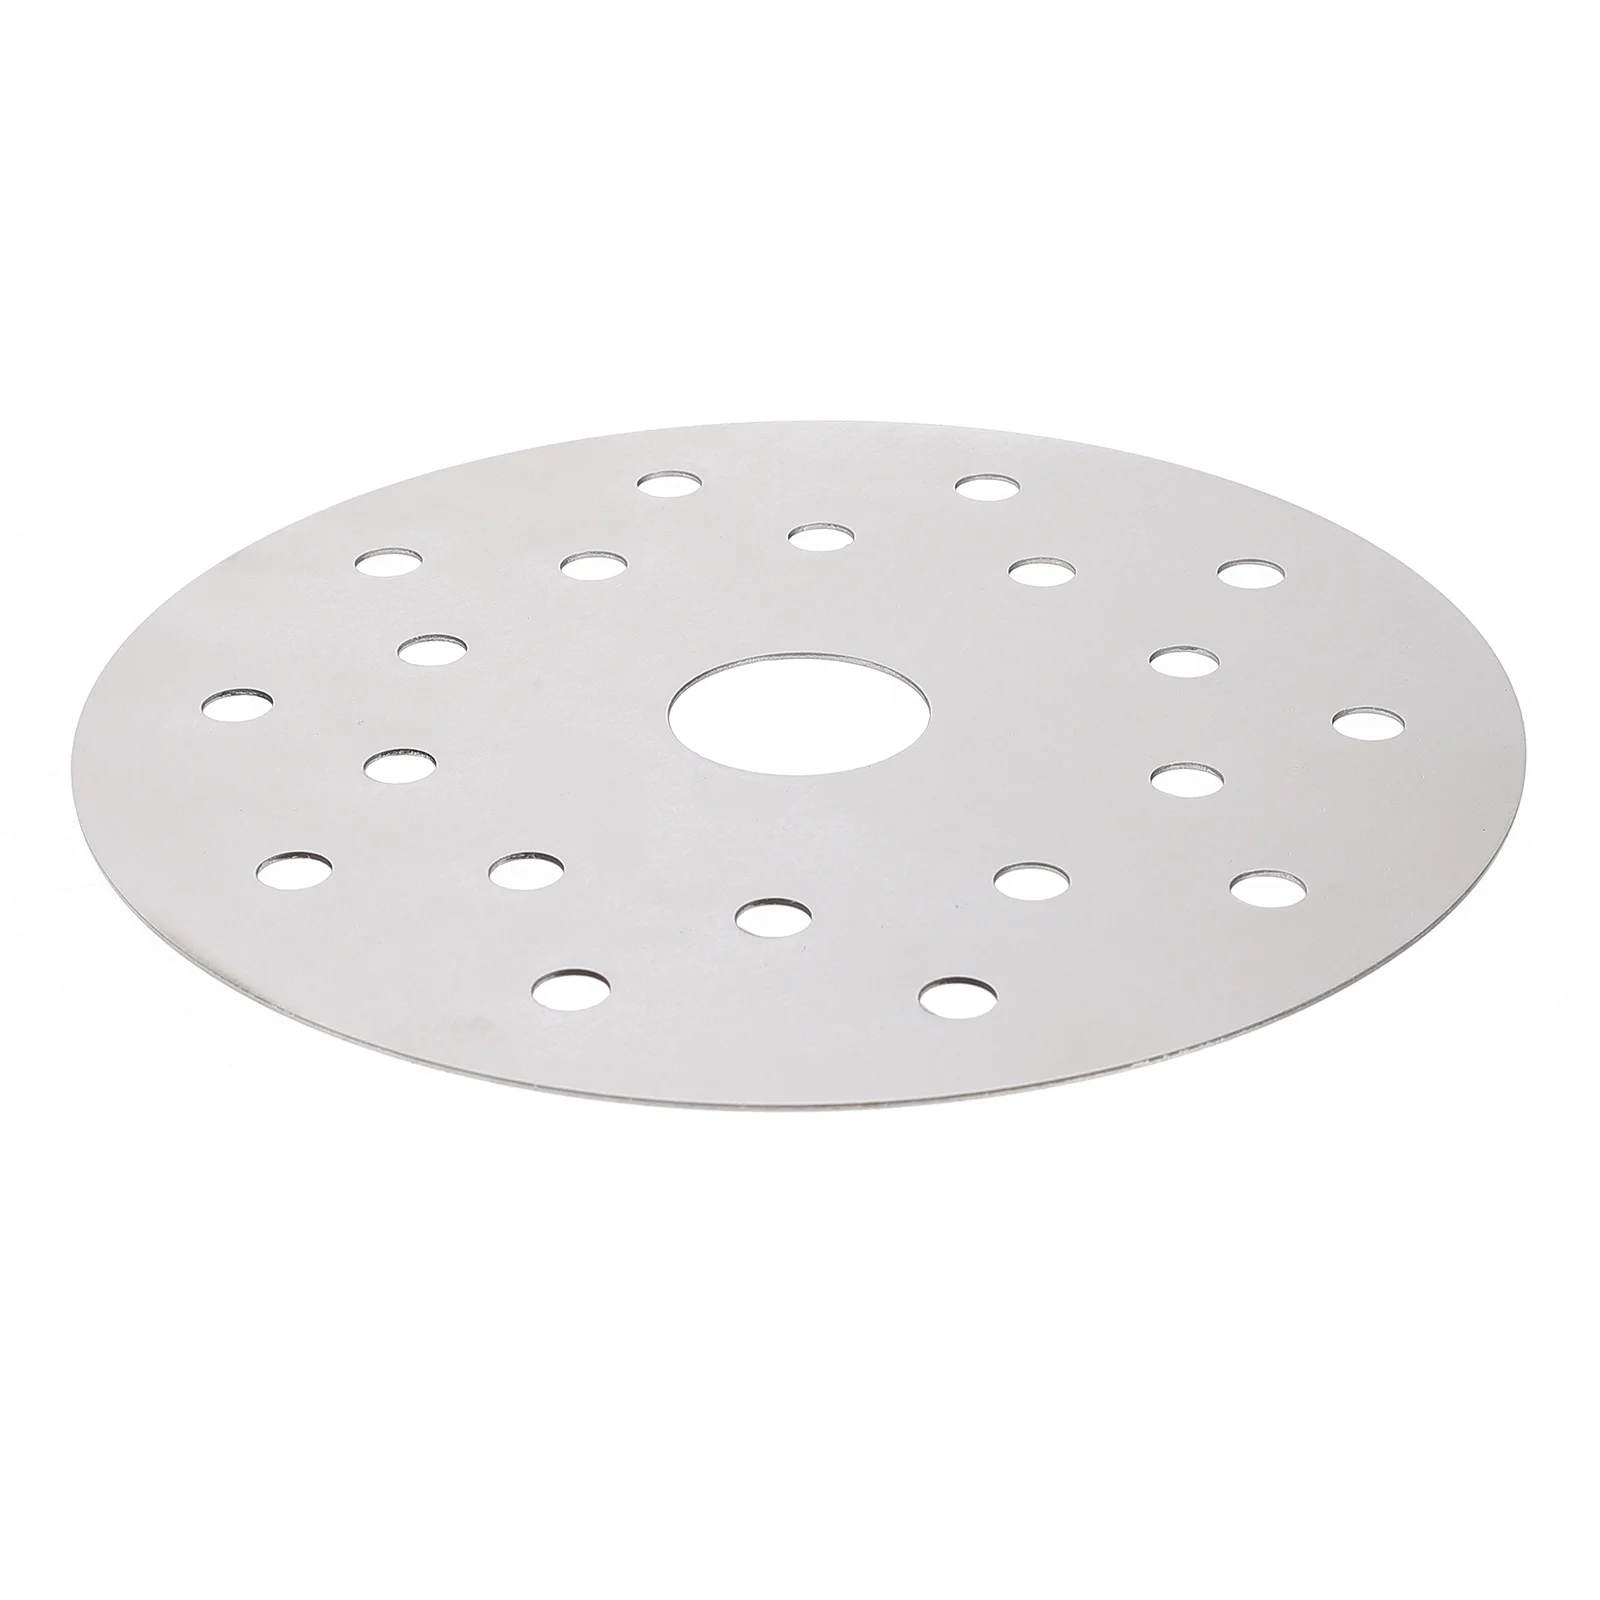 

Plate Heat Diffuser Induction Adapter Cooktop Stove Flame Conductionhob Mat Ring Simmersheet Cookware Casserole Infuser Cooker